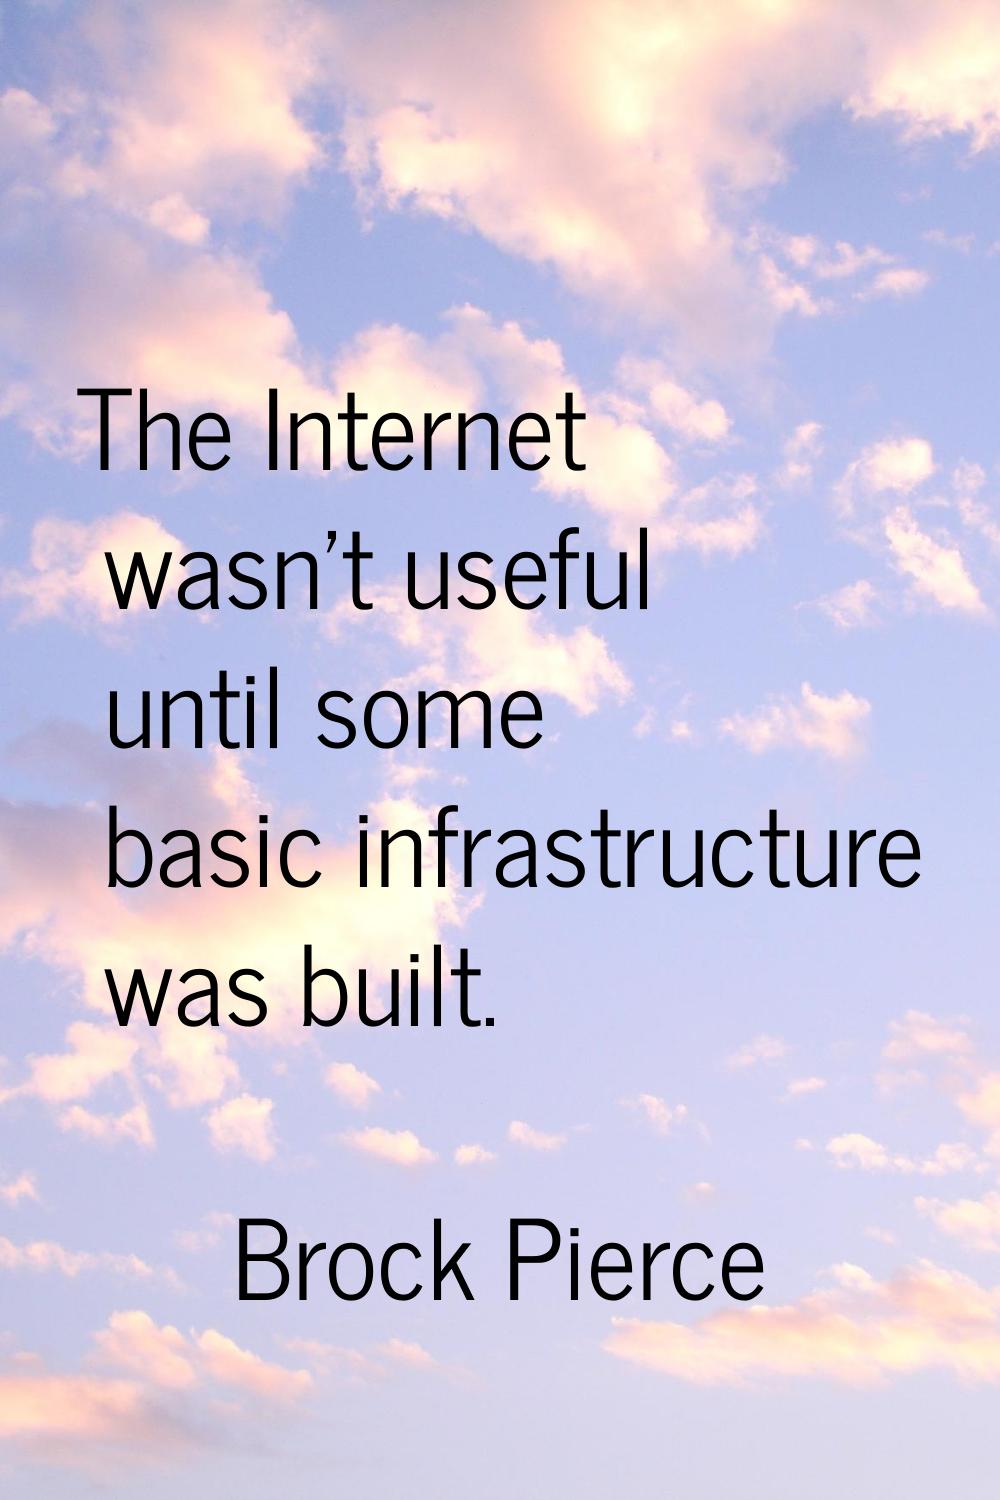 The Internet wasn't useful until some basic infrastructure was built.